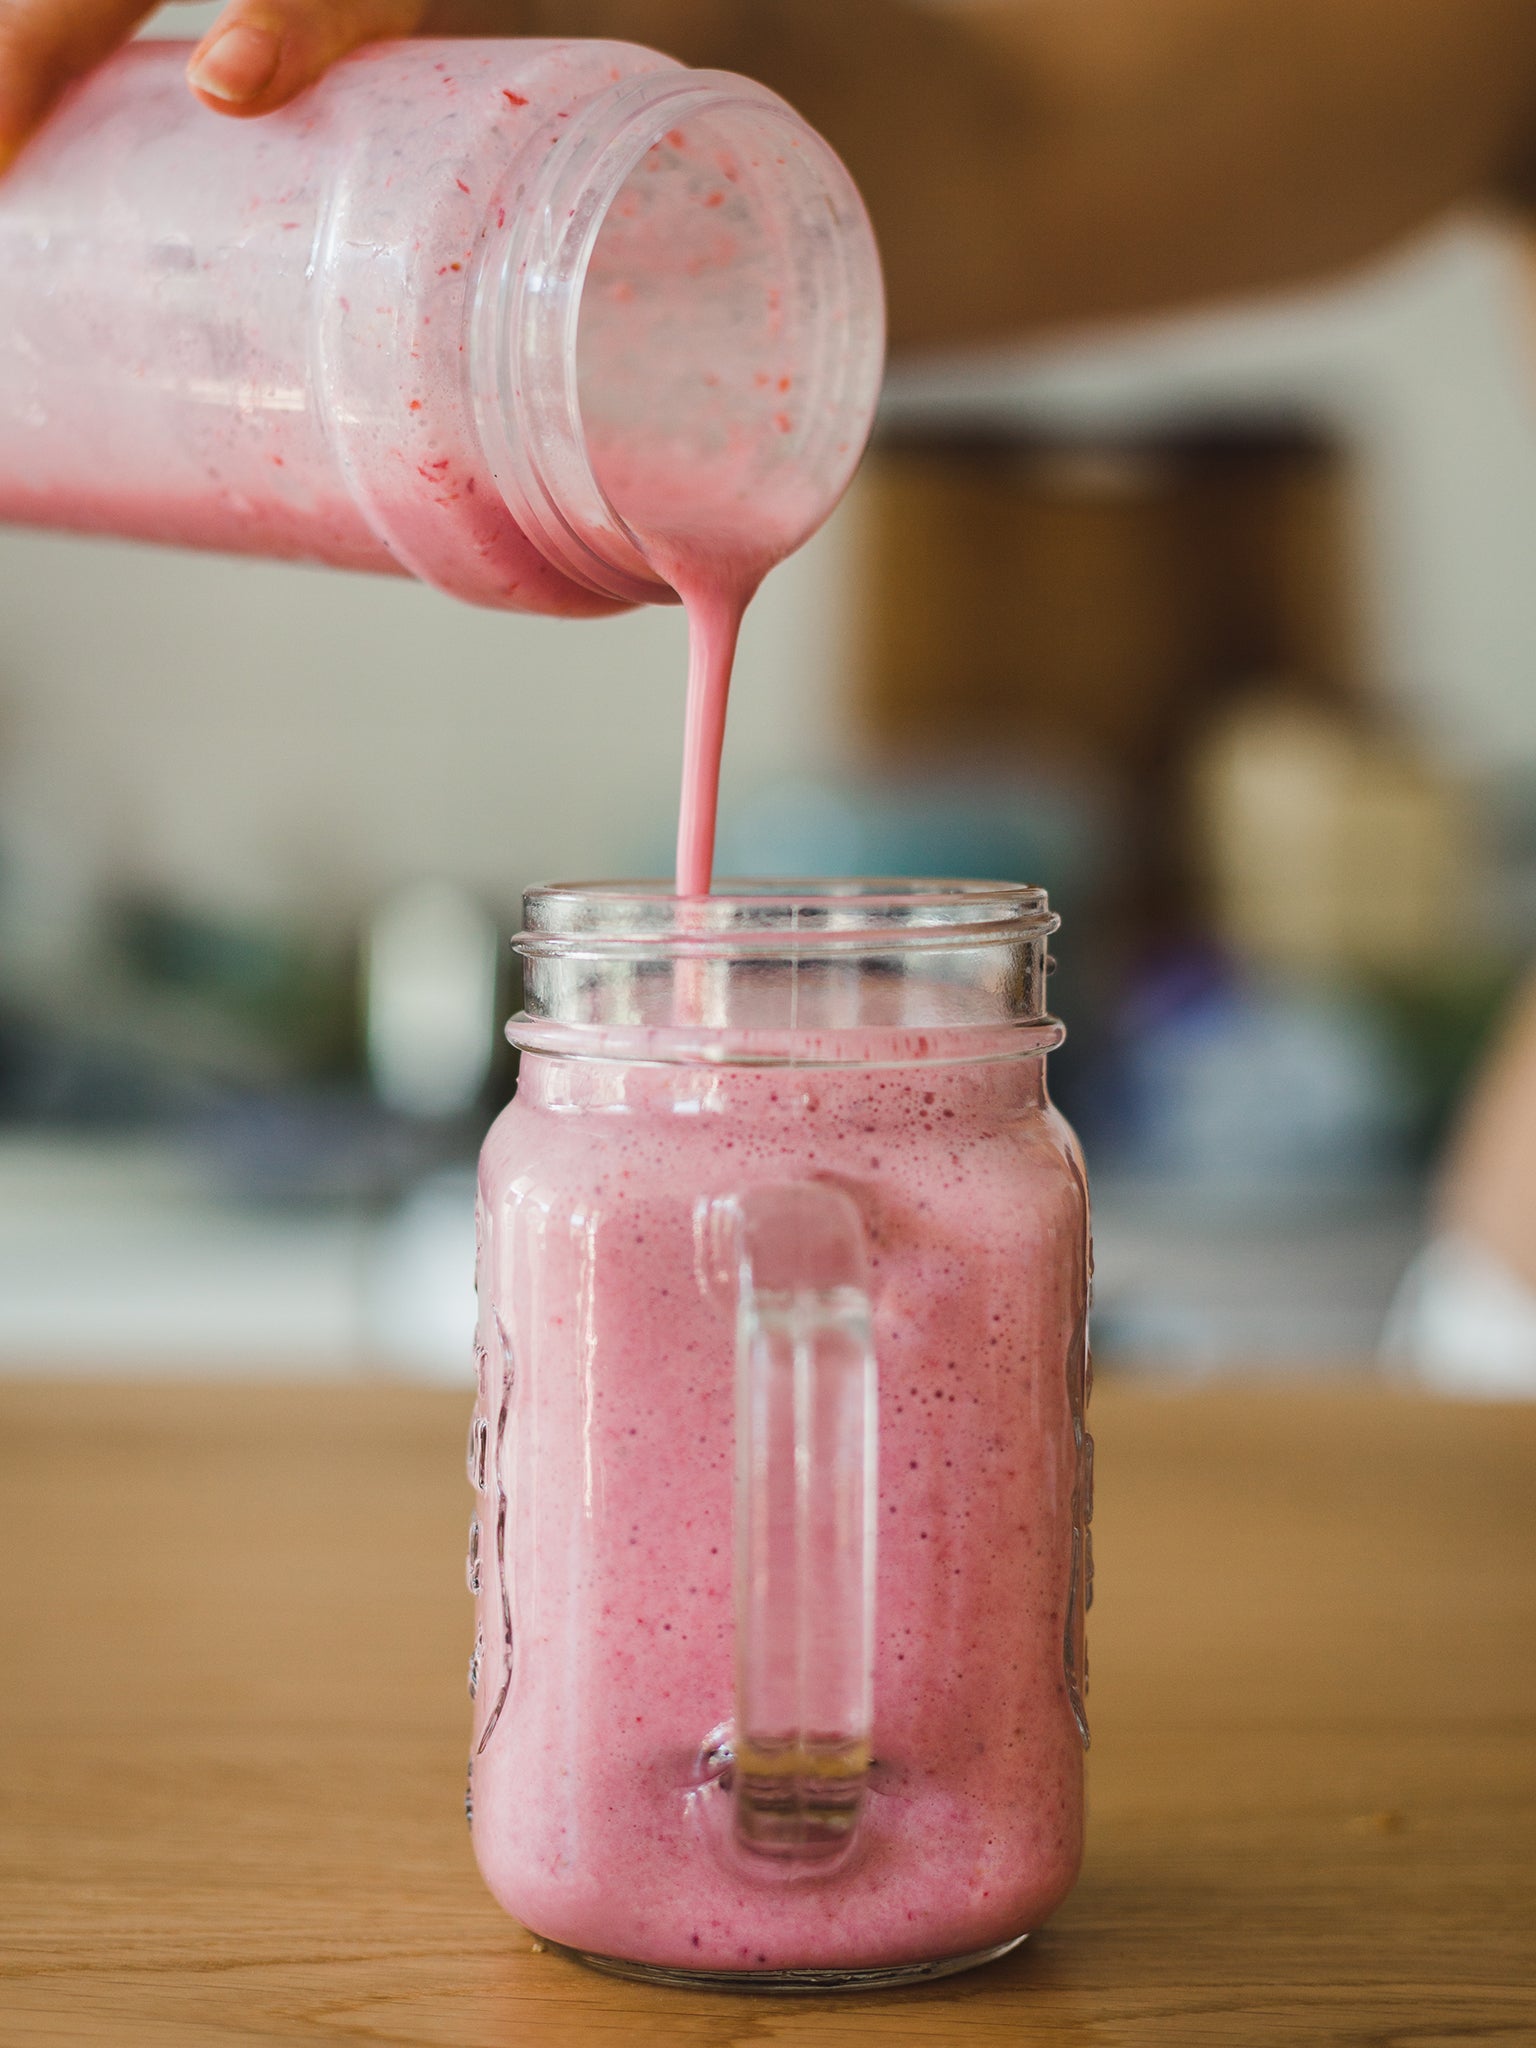 Smoothies make it easy to vary your fruit and vegetable intake